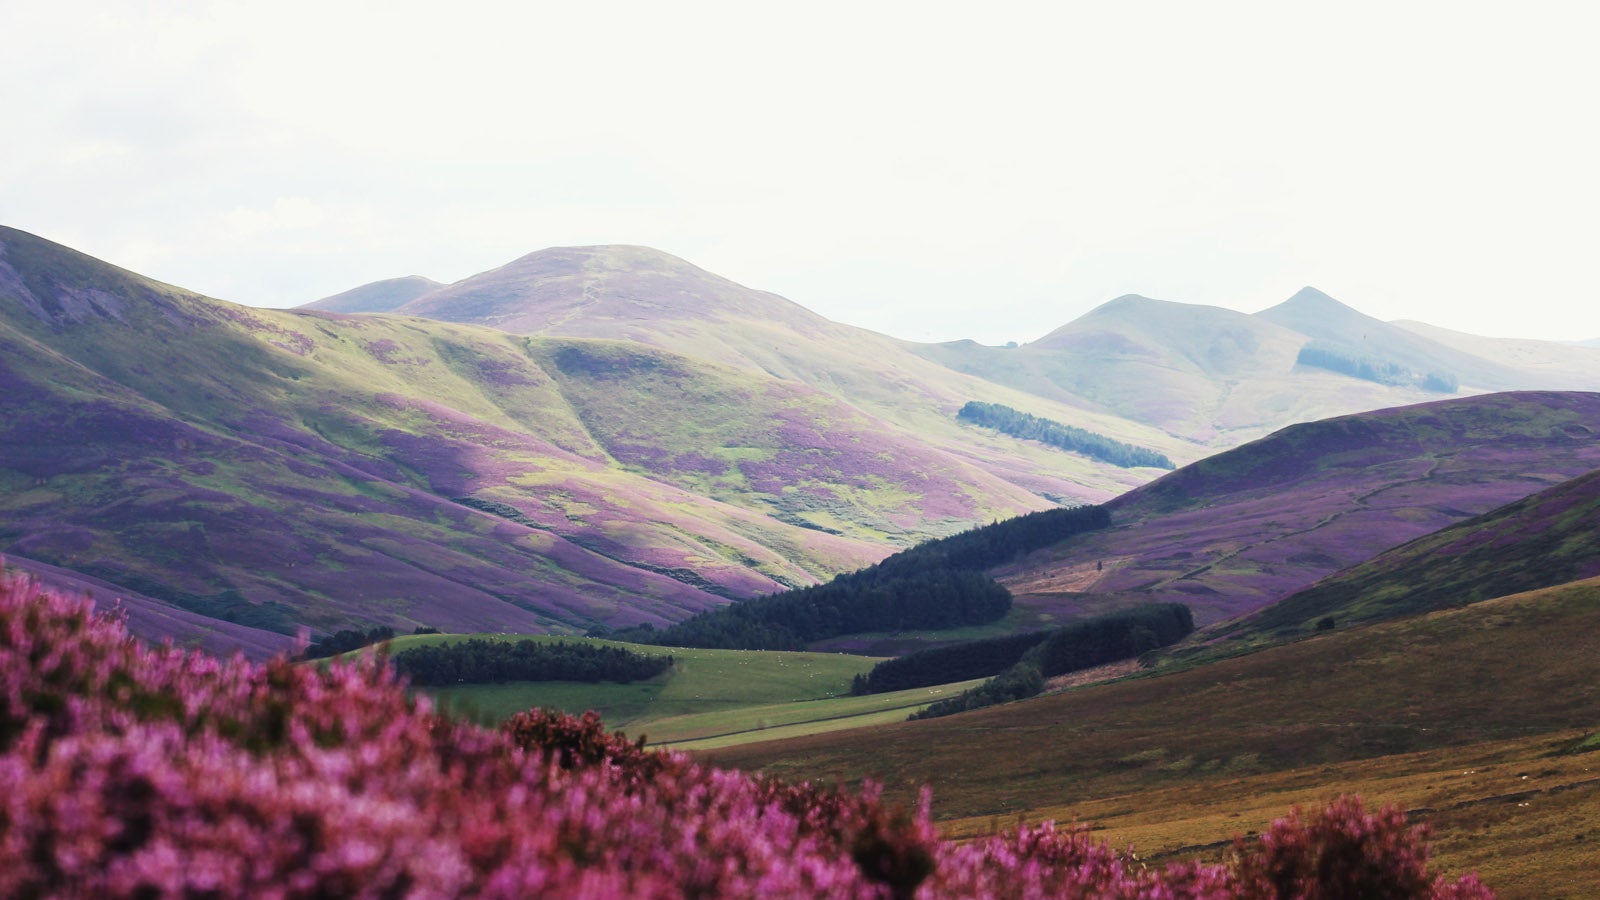 A photo of Scottish hills, with heather appearing in the foreground